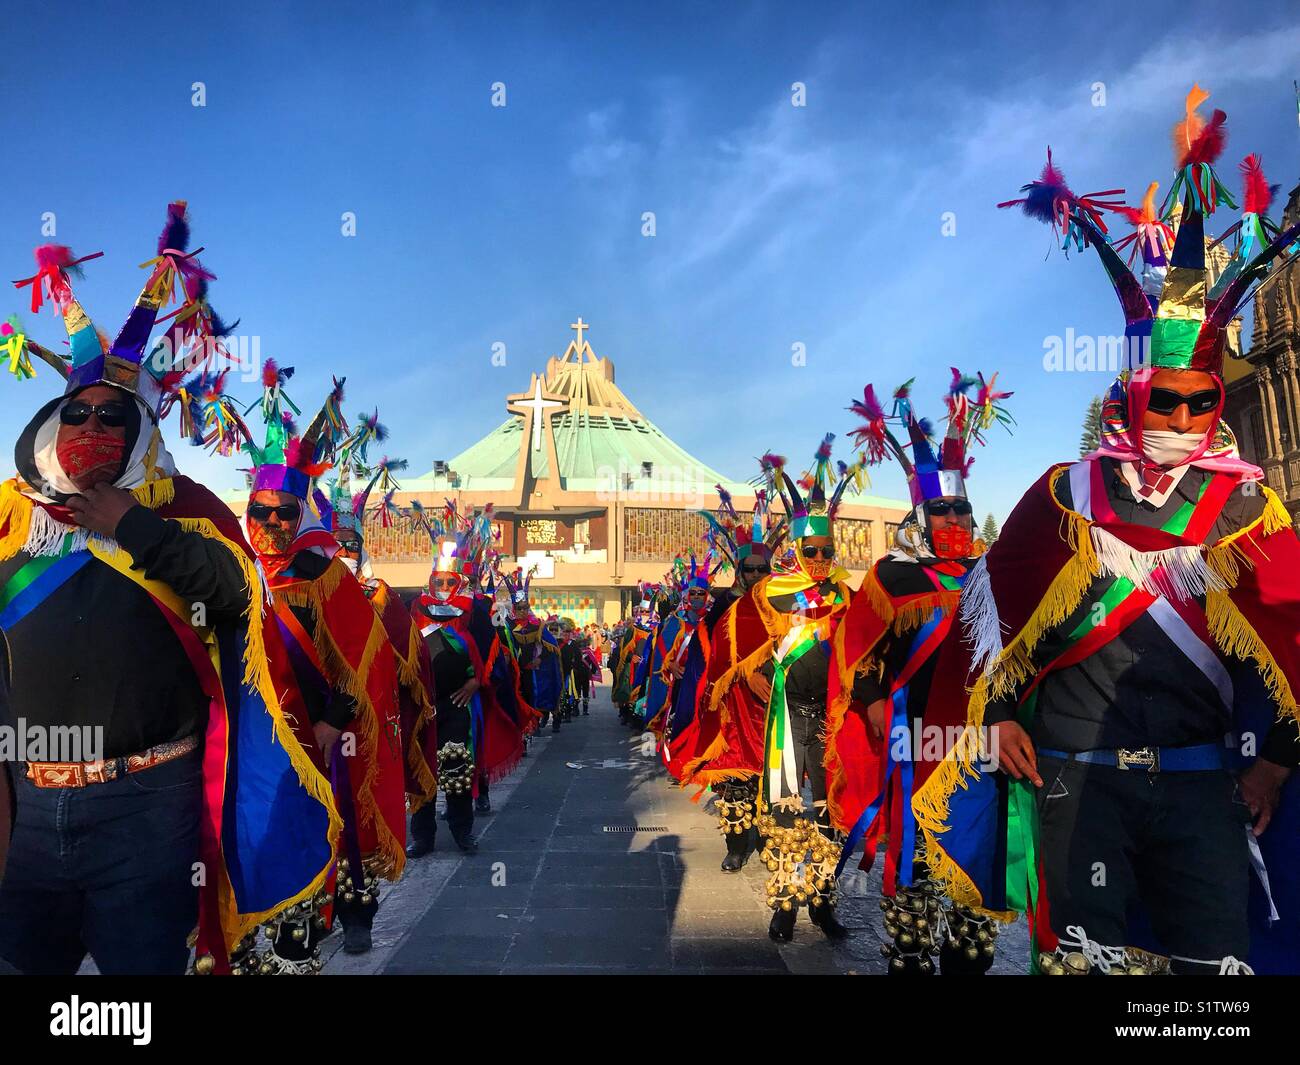 Danzantes perfom during the annual pilgrimage to Our Lady of Guadalupe basilica in Mexico City, Mexico Stock Photo